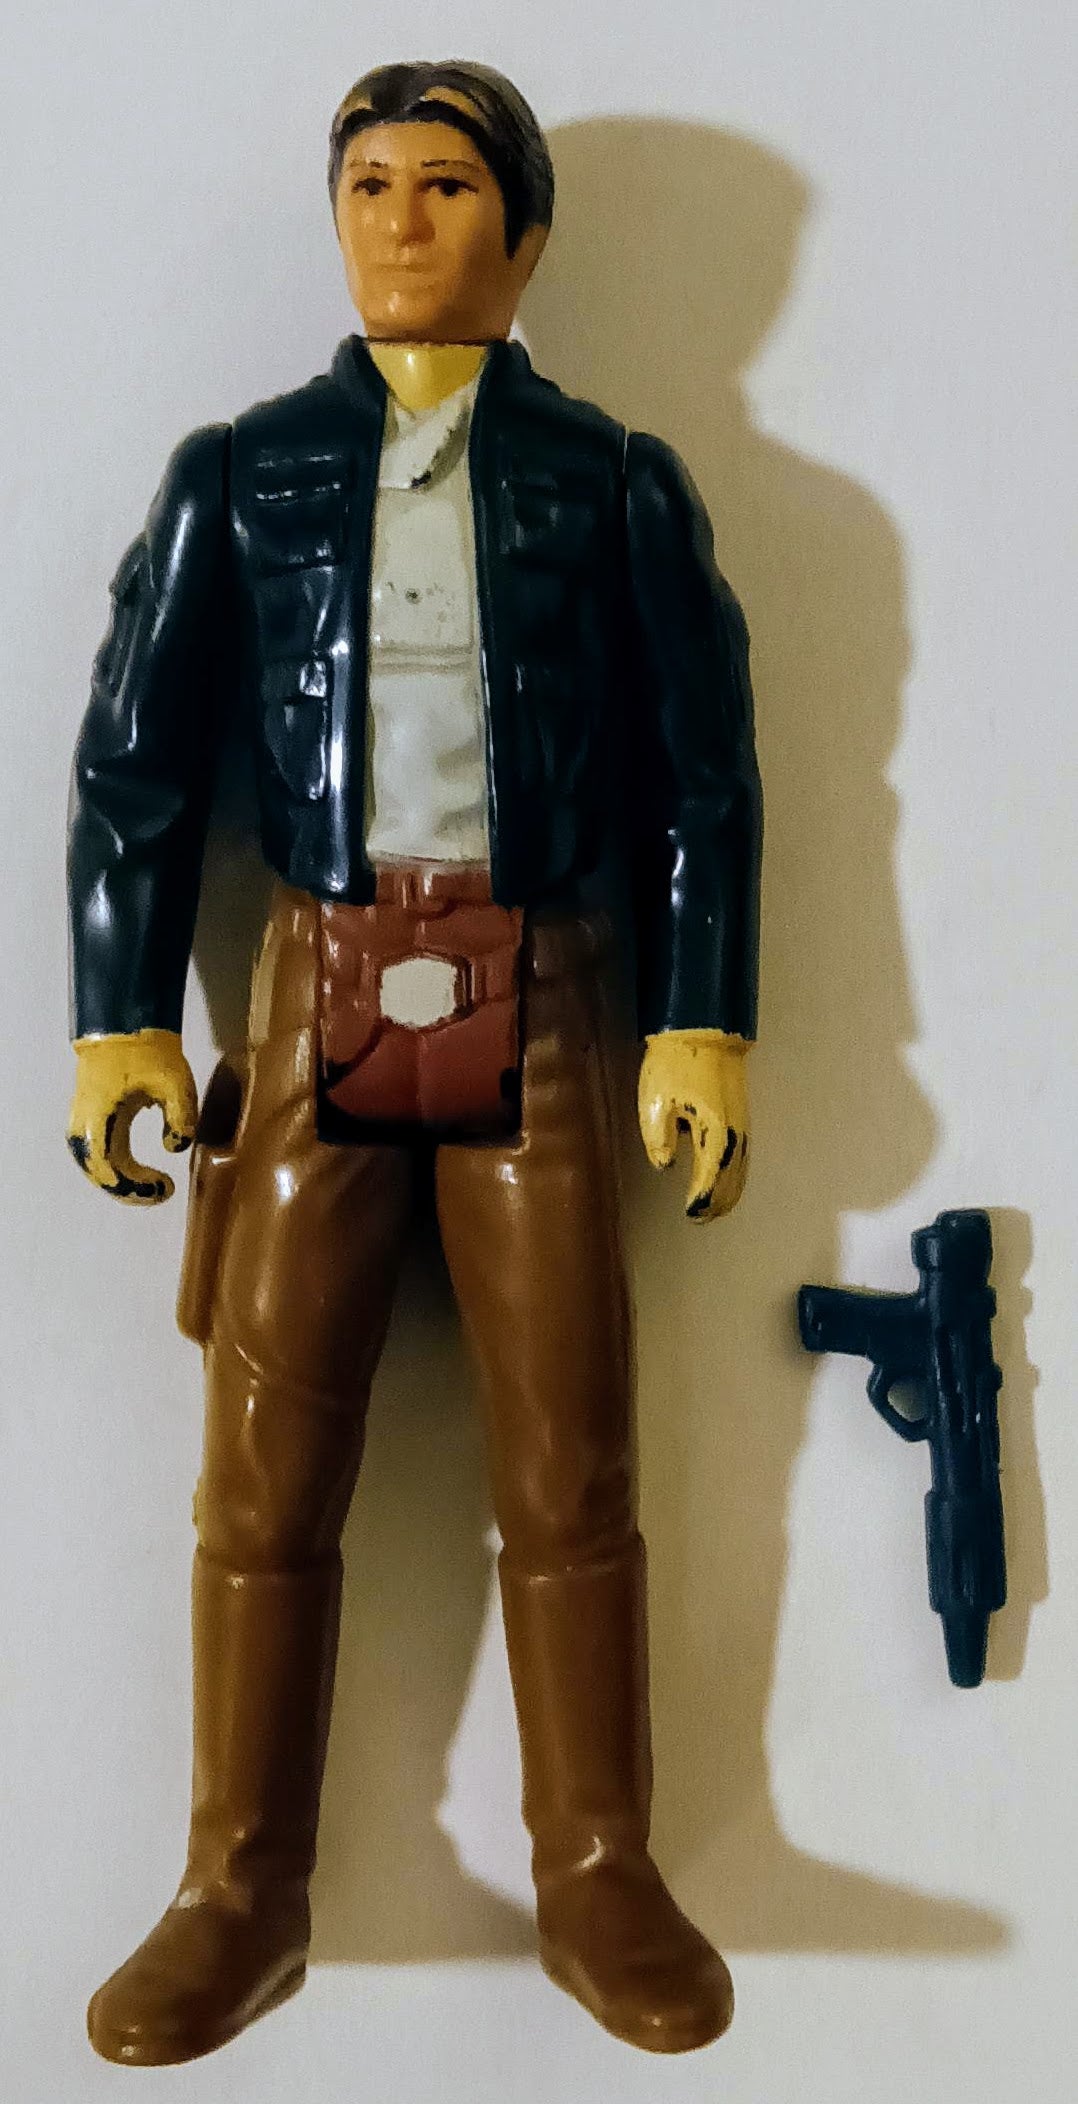 Star Wars action figure - Han Solo (Bespin Outfit)